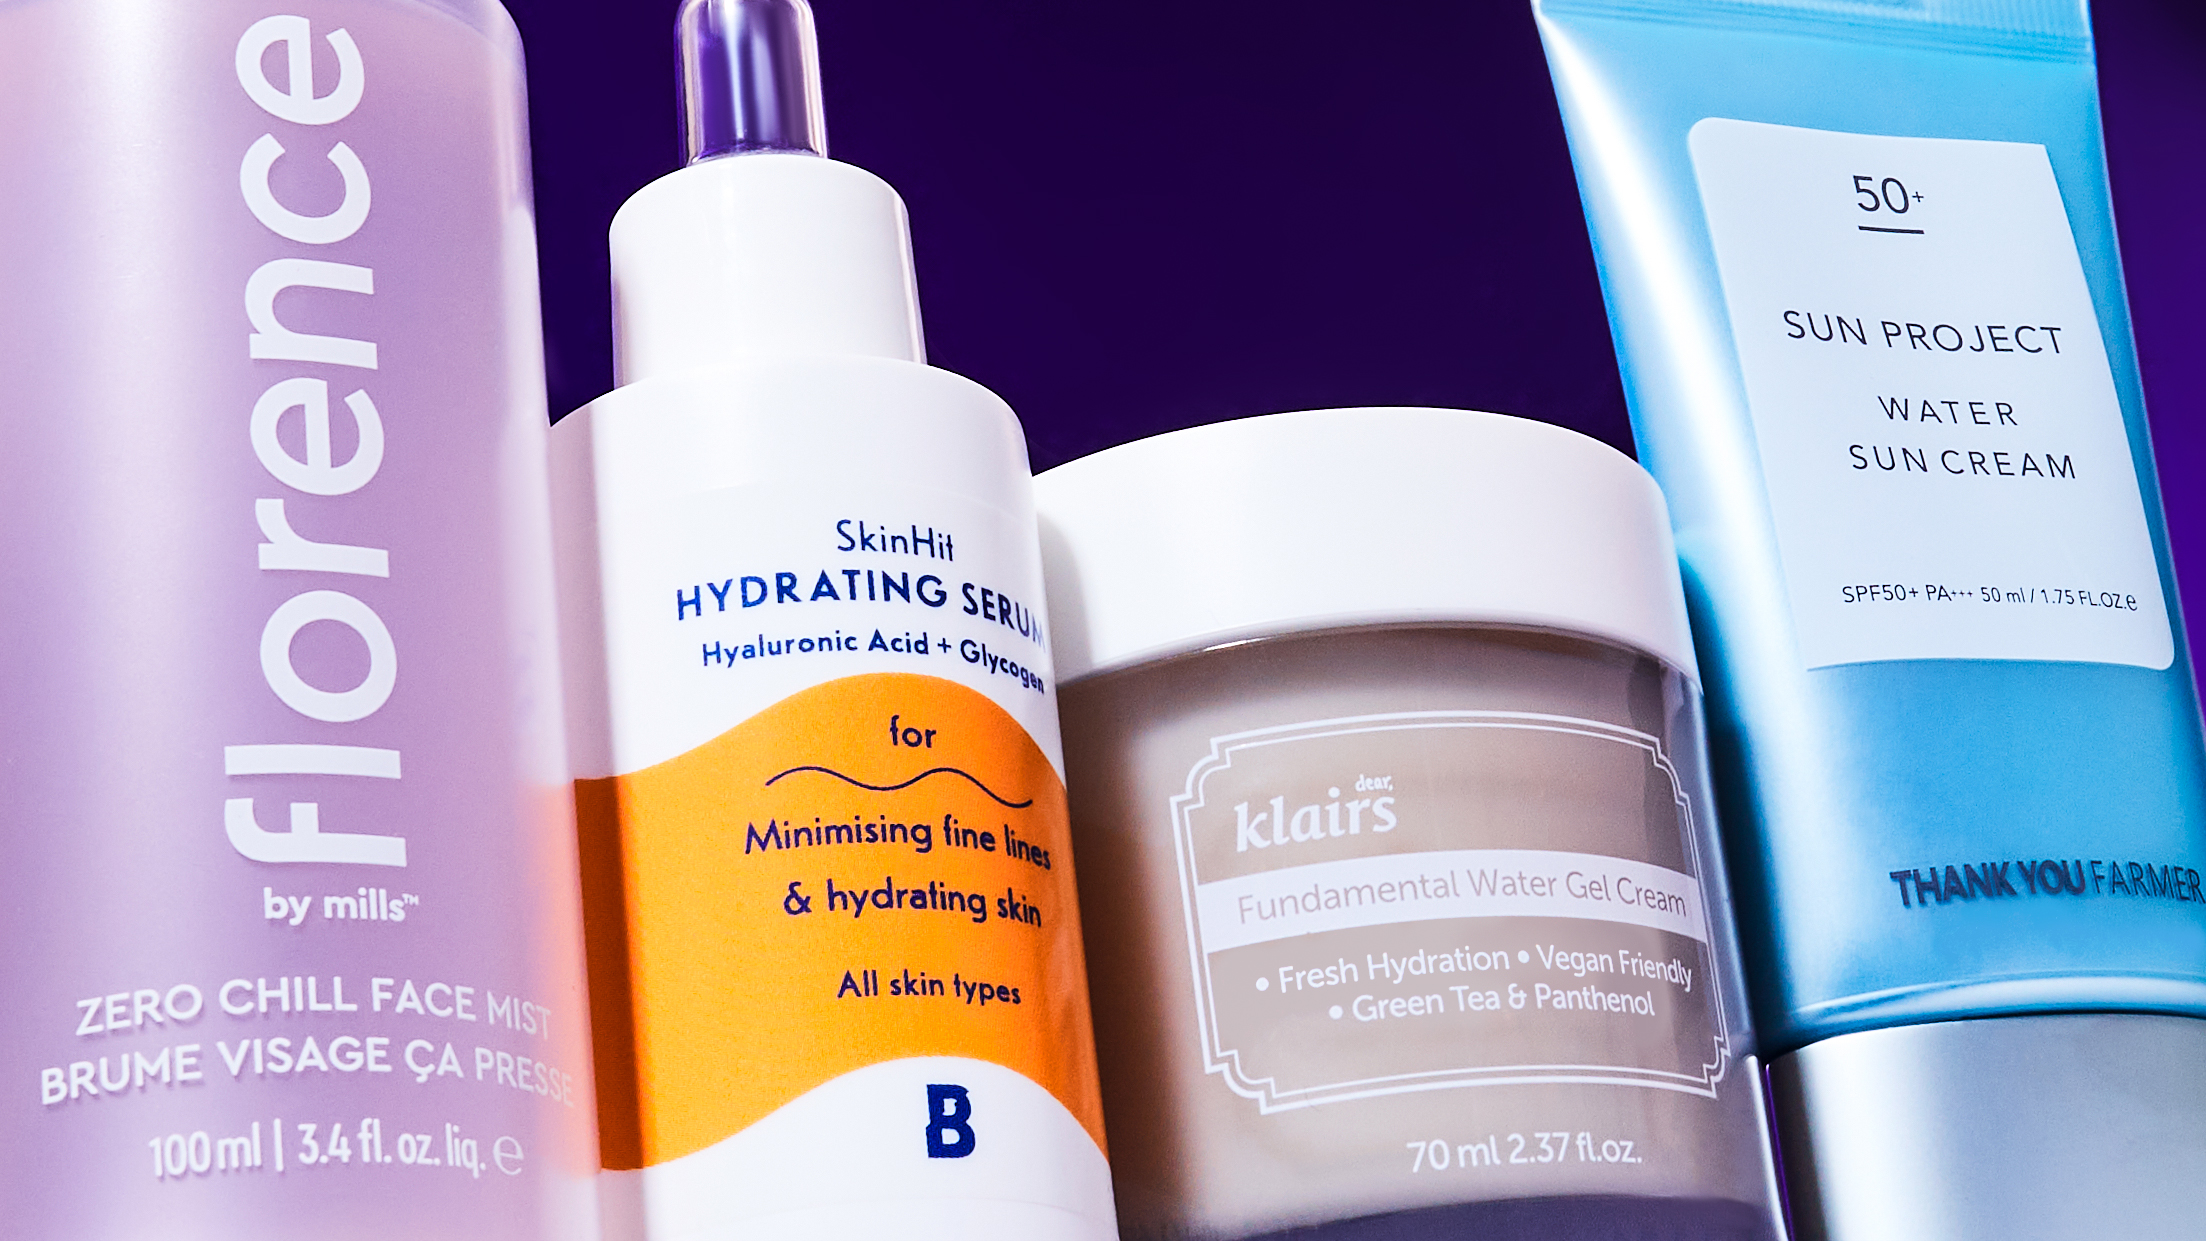 The best personal care products of 2021